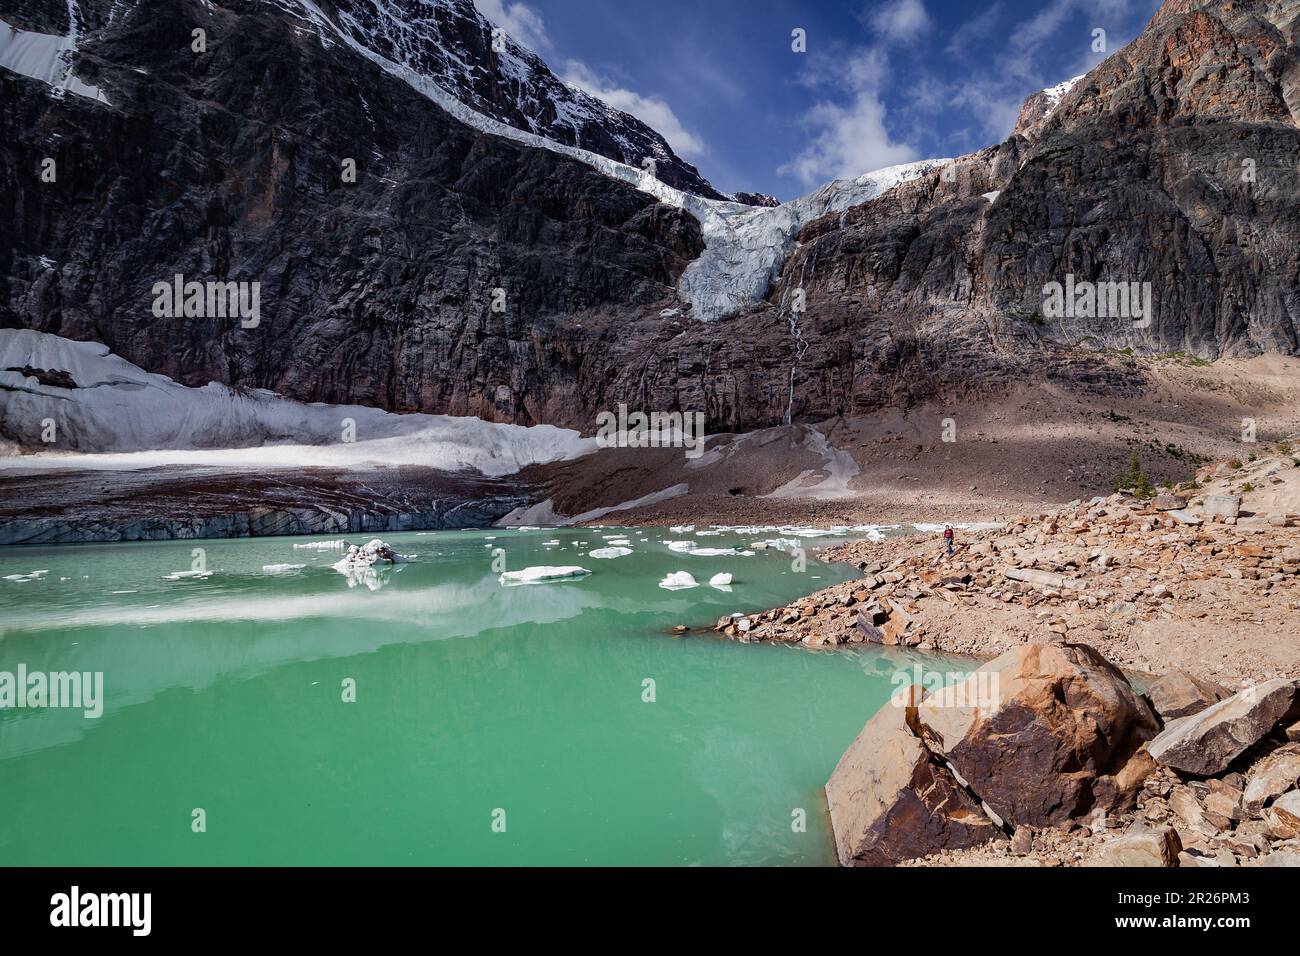 Lake at the foot of a glacier, green water, with pieces of melting ice,  turquoise color of the water, mountain cliff overlooking the lake,  dominated b Stock Photo - Alamy